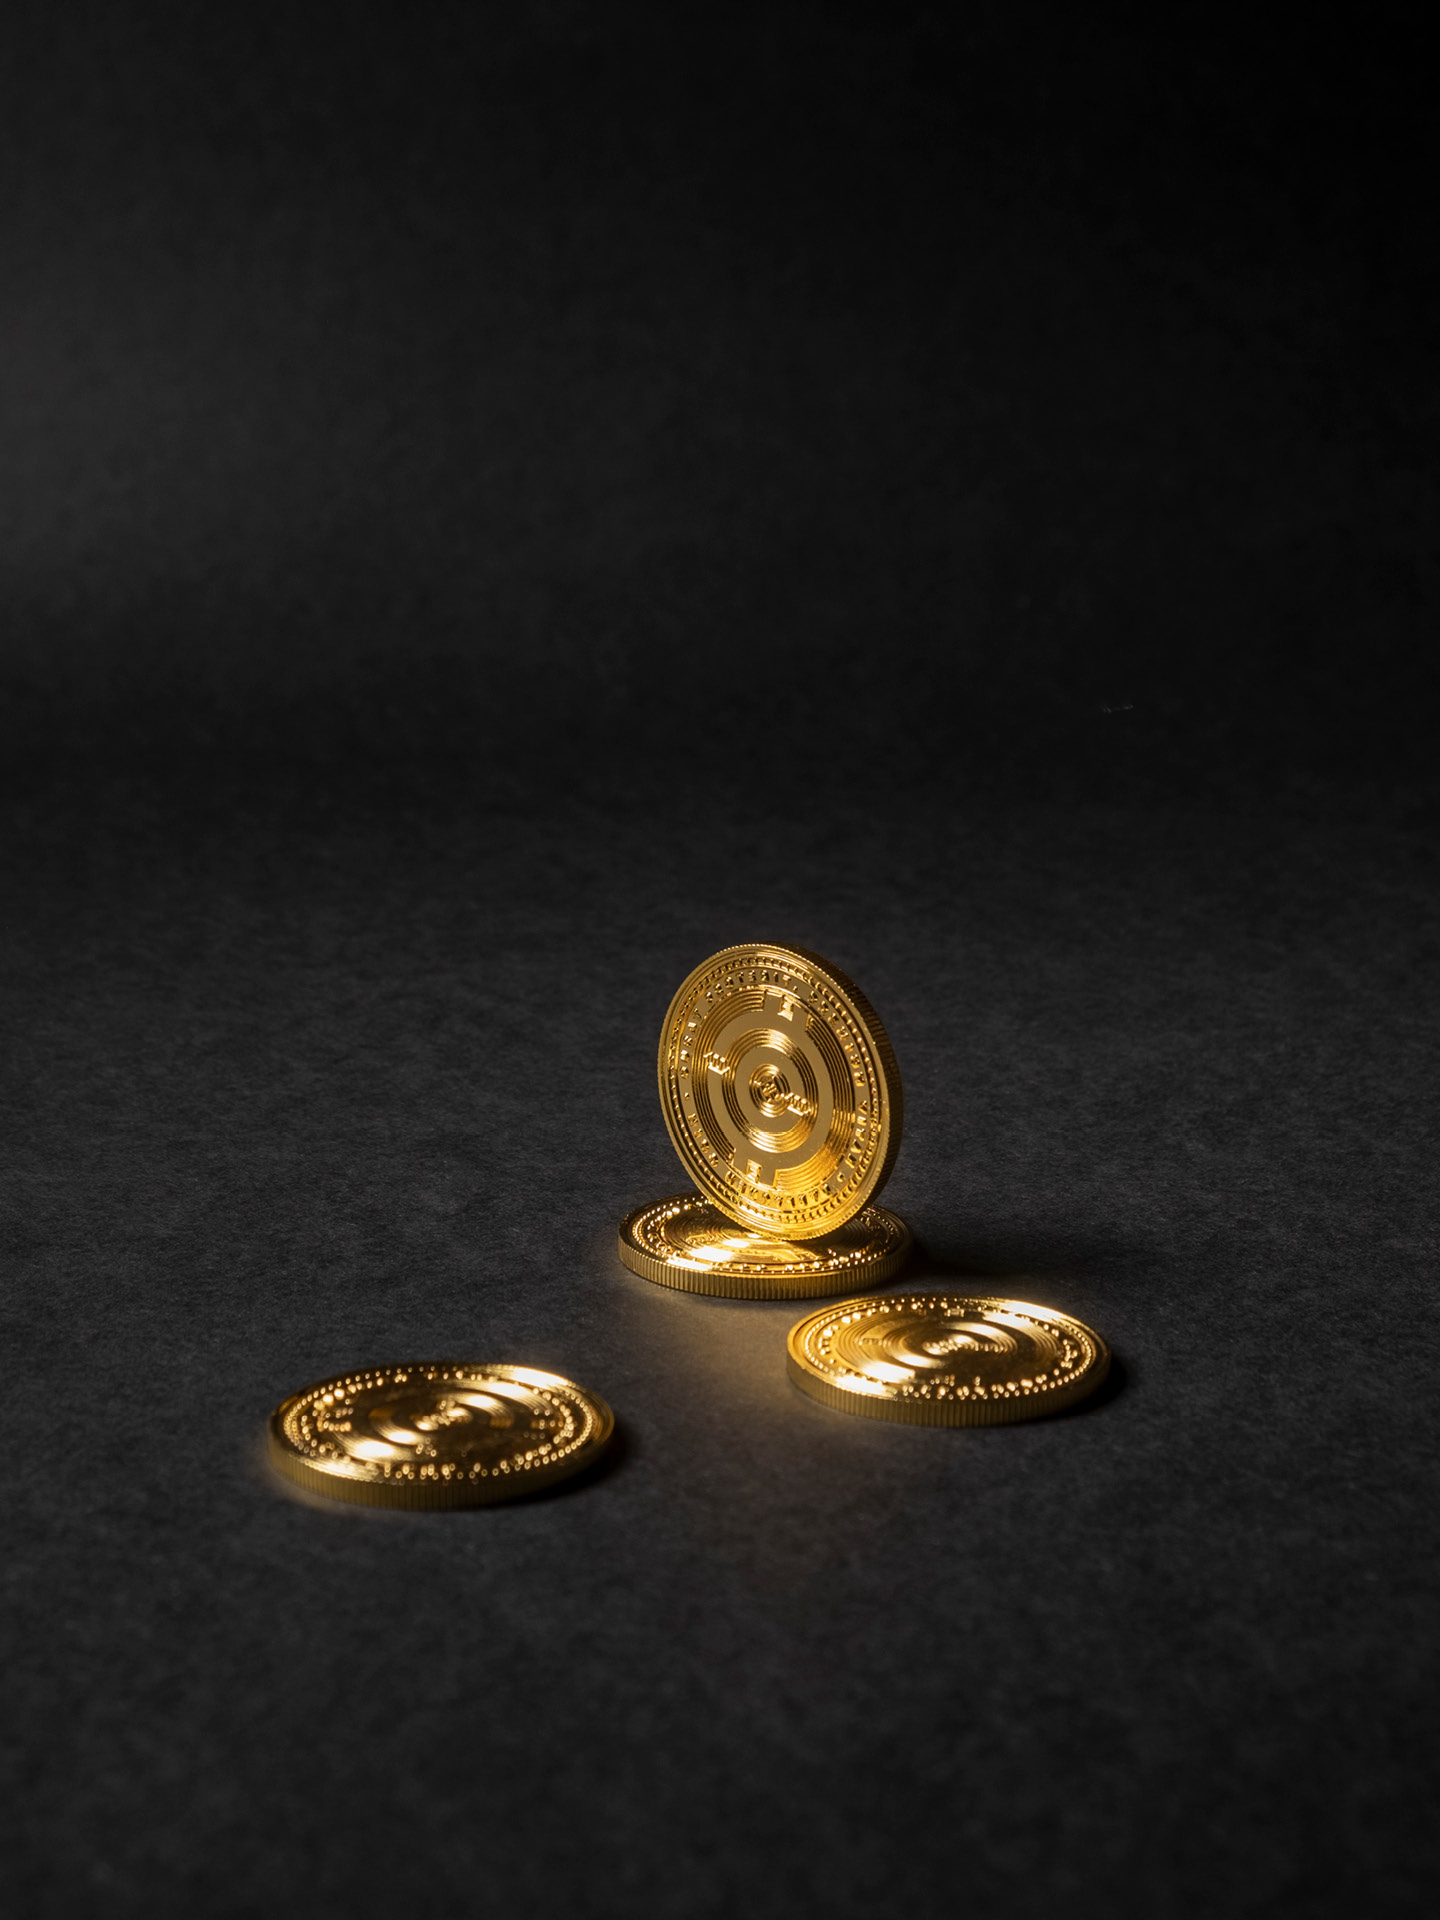 Four golden coins made for the digital currency promoted by the brand